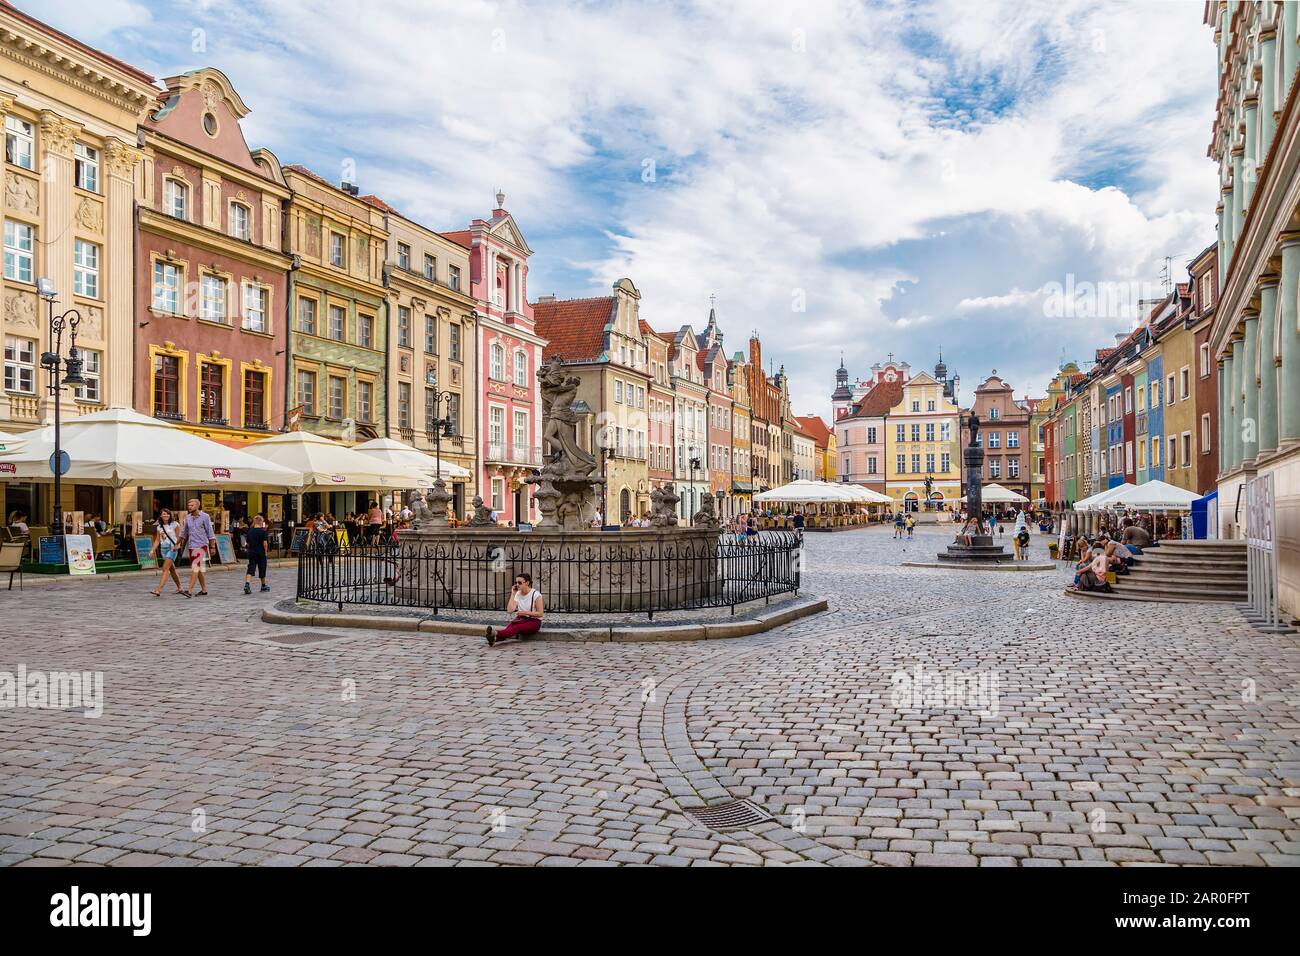 POZNAN, POLAND - AUGUST 04, 2014: An old shopping area with historical perimeter houses, a plague column and a fountain in the city of Poznan. Poland Stock Photo